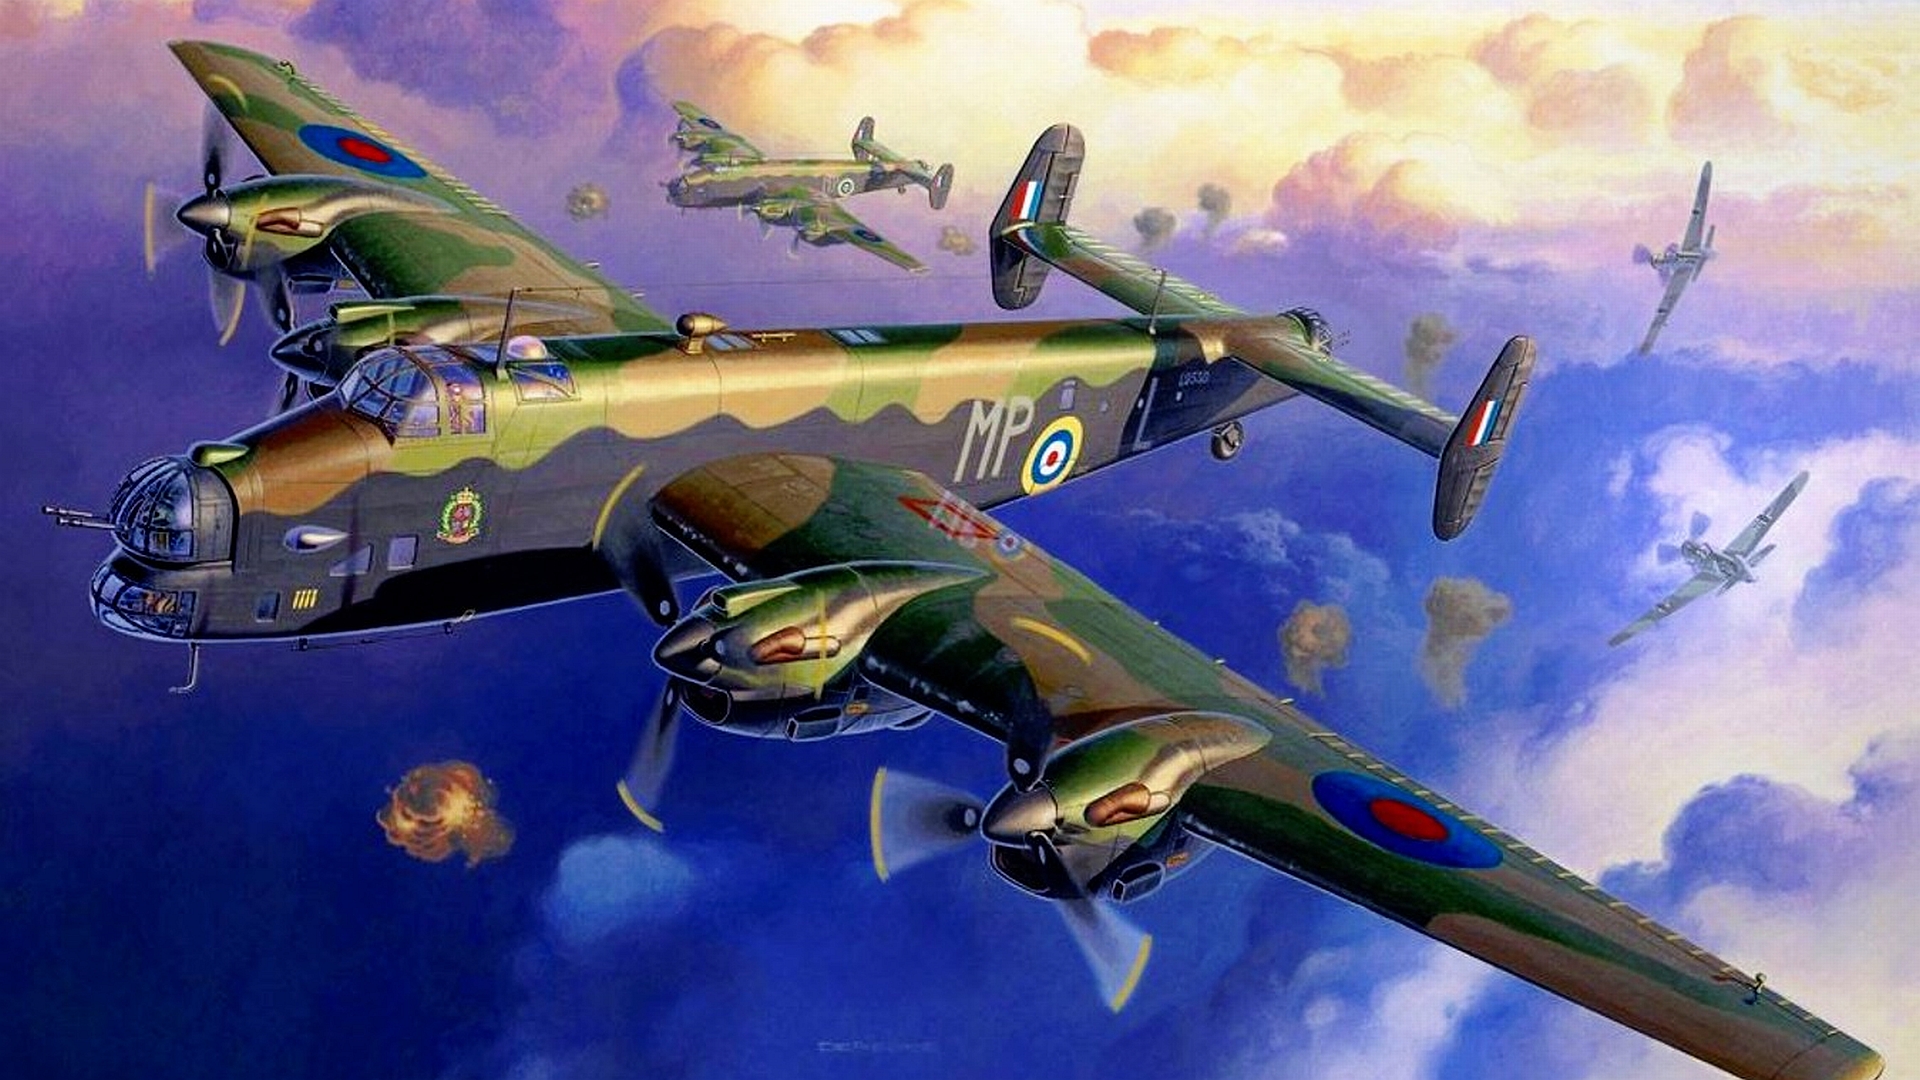 military, handley page halifax, air force, aircraft, airplane, bomber, world war ii, bombers